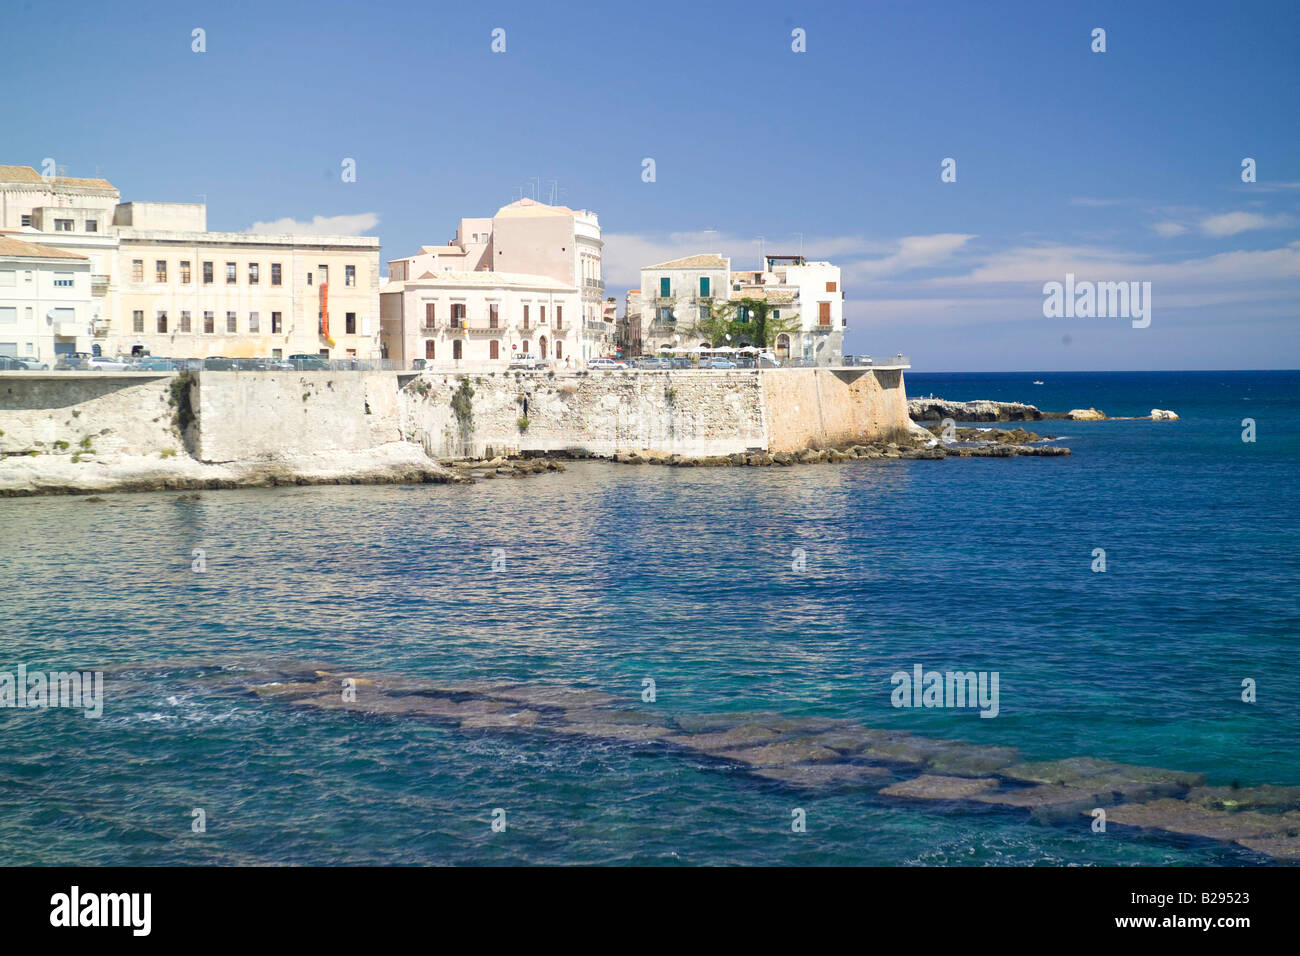 Seafront Syracusa Sicily Date 28 05 2008 Ref ZB693 114320 0049 COMPULSORY CREDIT World Pictures Photoshot Stock Photo